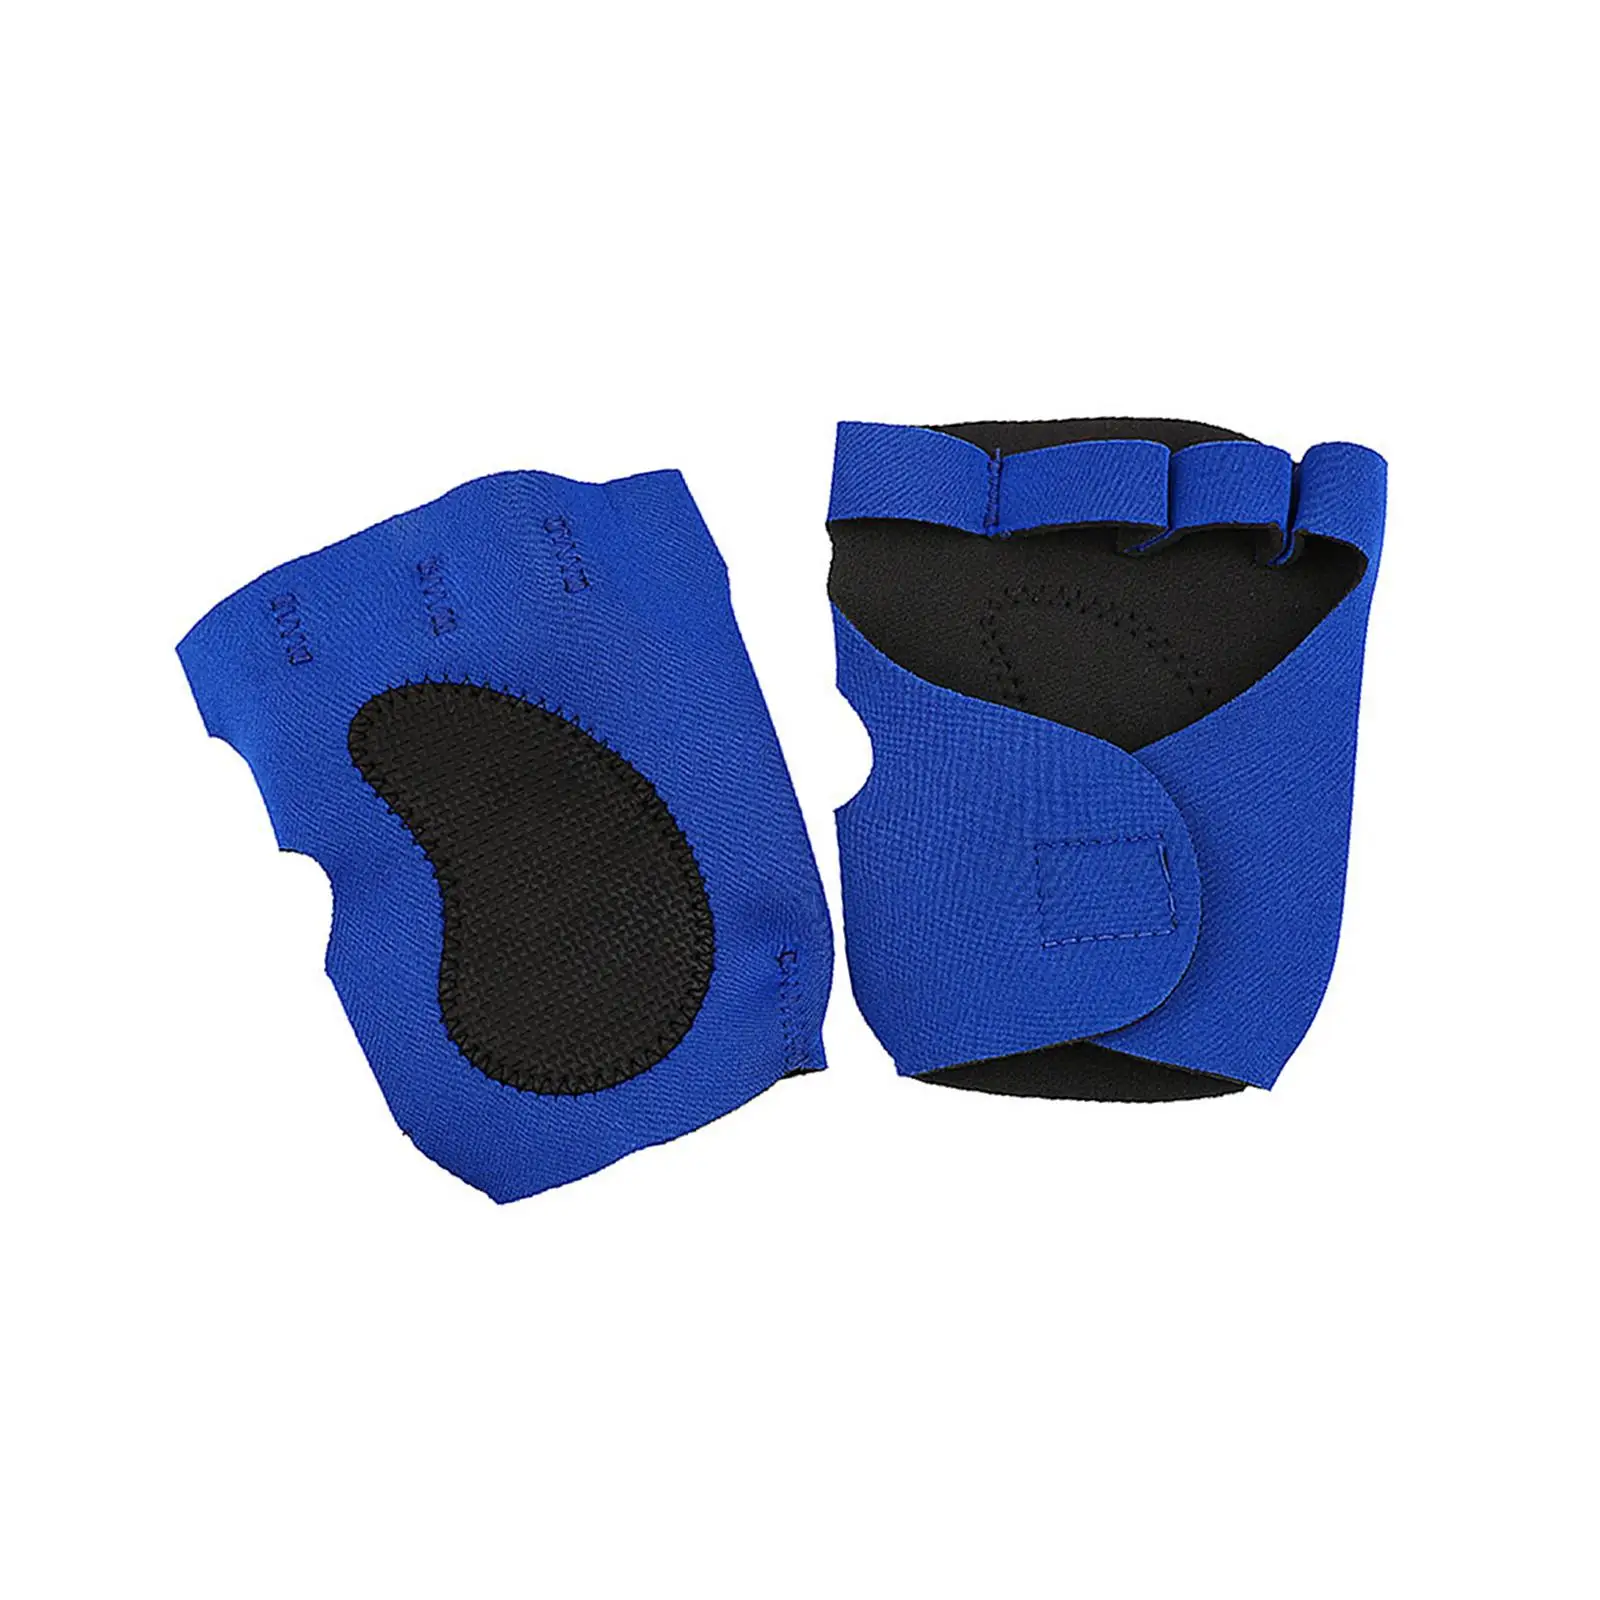 Workout Gloves Palm Protection Exercise Gloves Hand Guard Weight Lifting Gloves for Dumbbell Training Bodybuilding